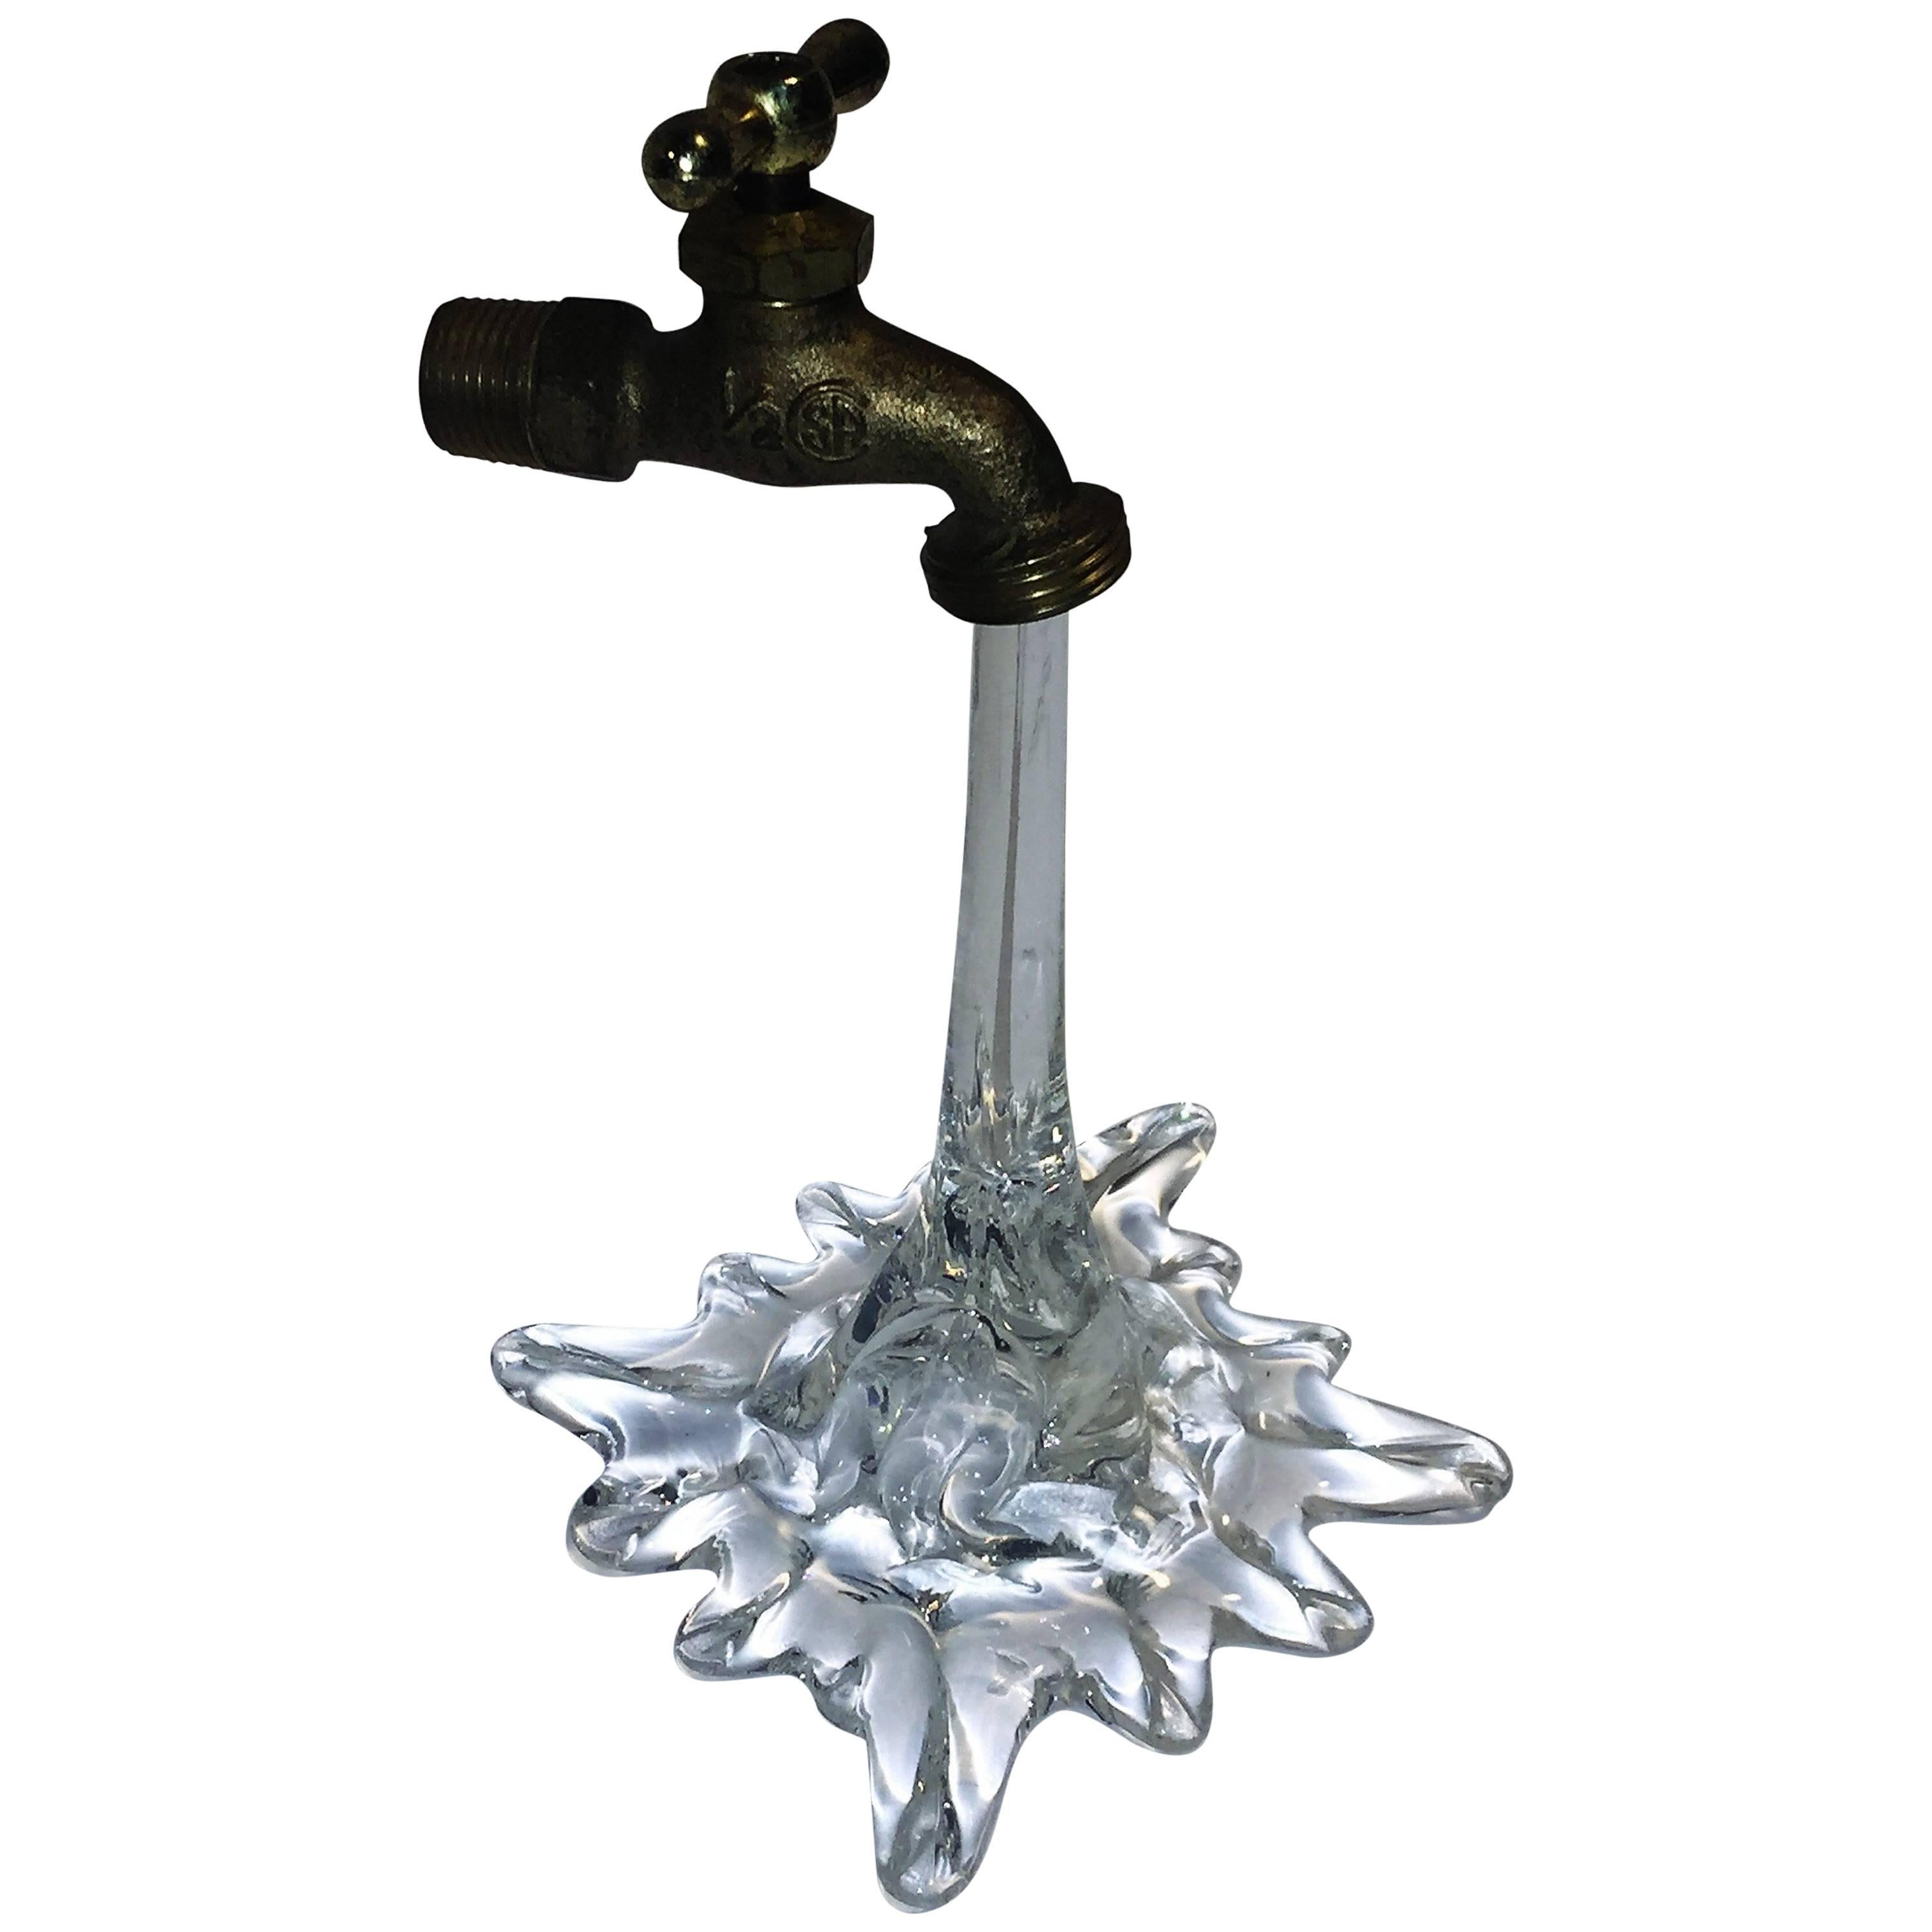 Illusory Italian Brass Faucet Flowing Water Glass Sculpture For Sale